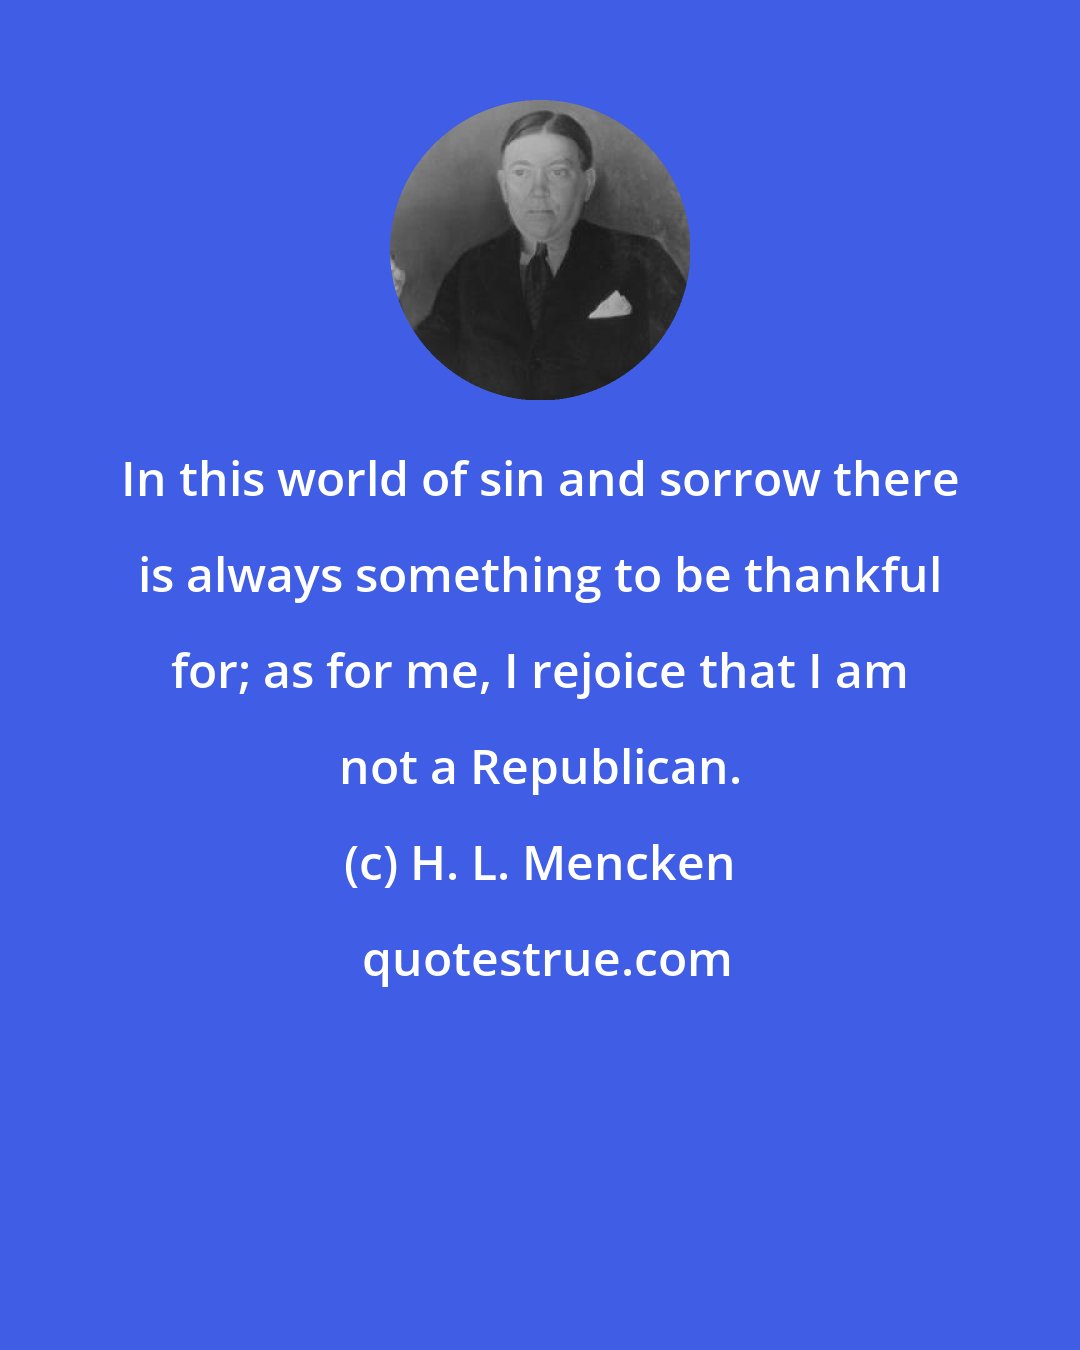 H. L. Mencken: In this world of sin and sorrow there is always something to be thankful for; as for me, I rejoice that I am not a Republican.